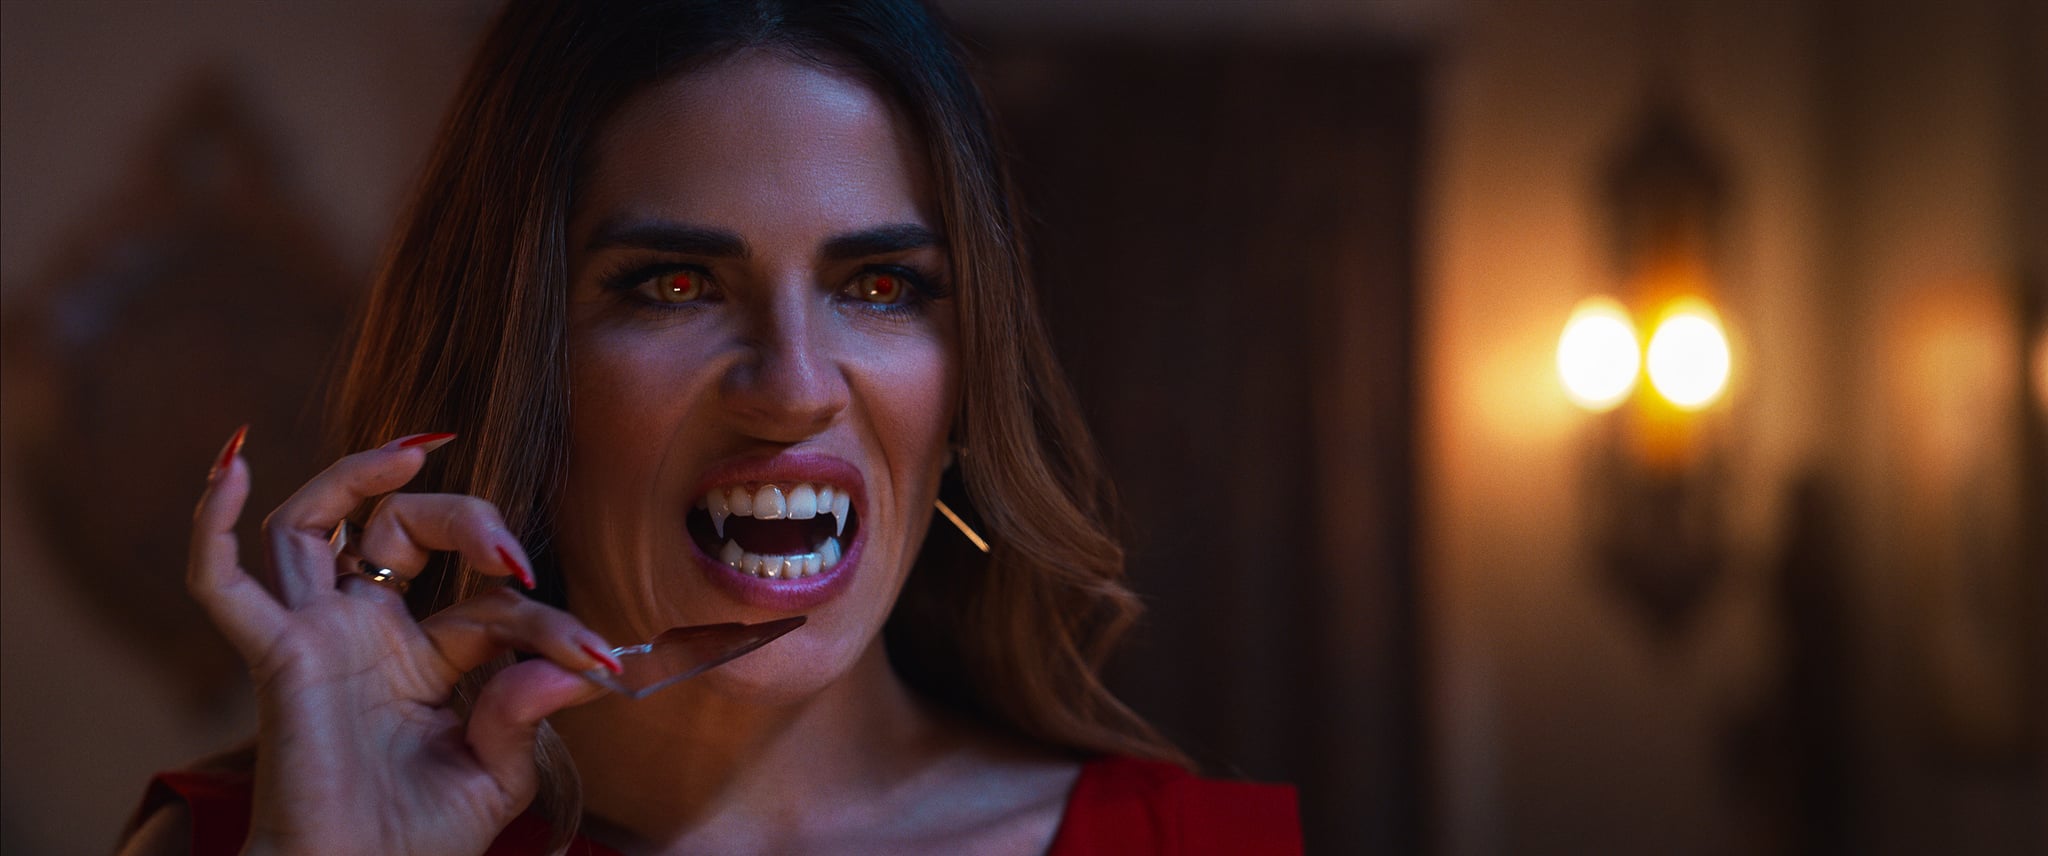 Karla Souza as Audrey in Day Shift.